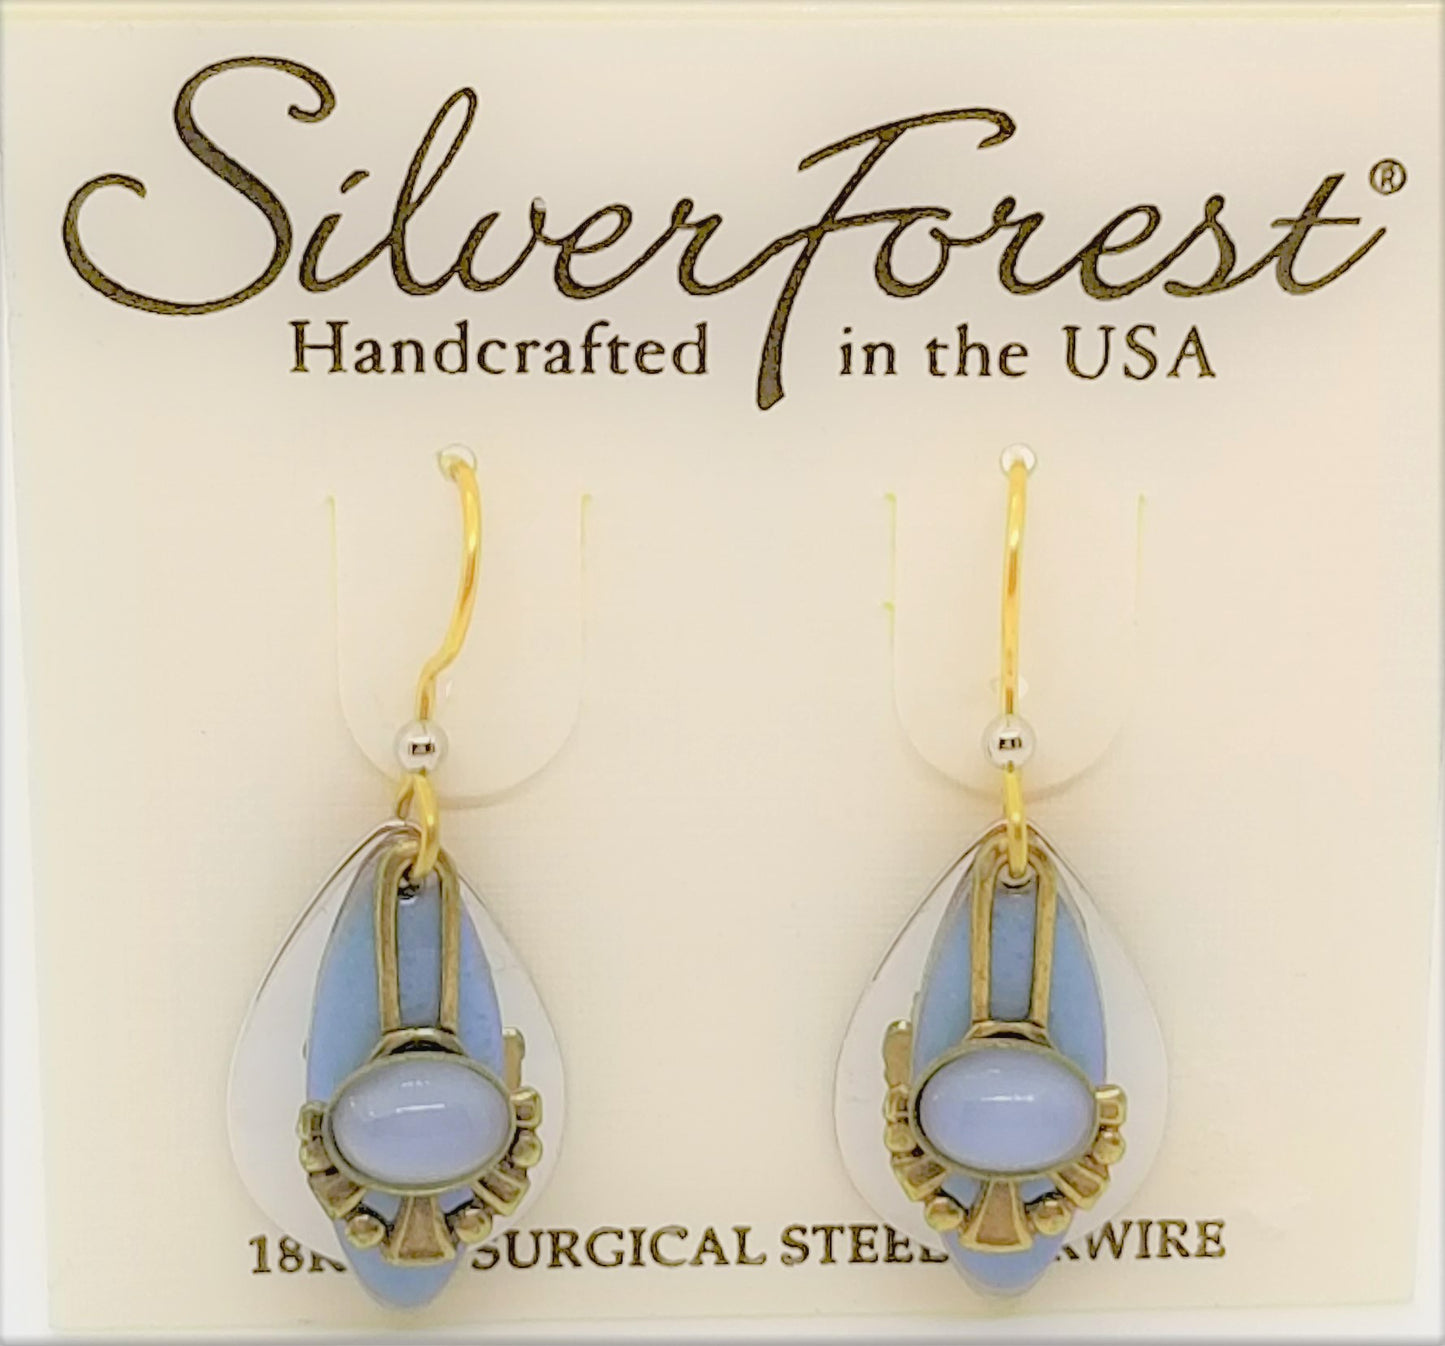 Silver forest 18kt yellow gold plated surgical steel ear wires blue earrings